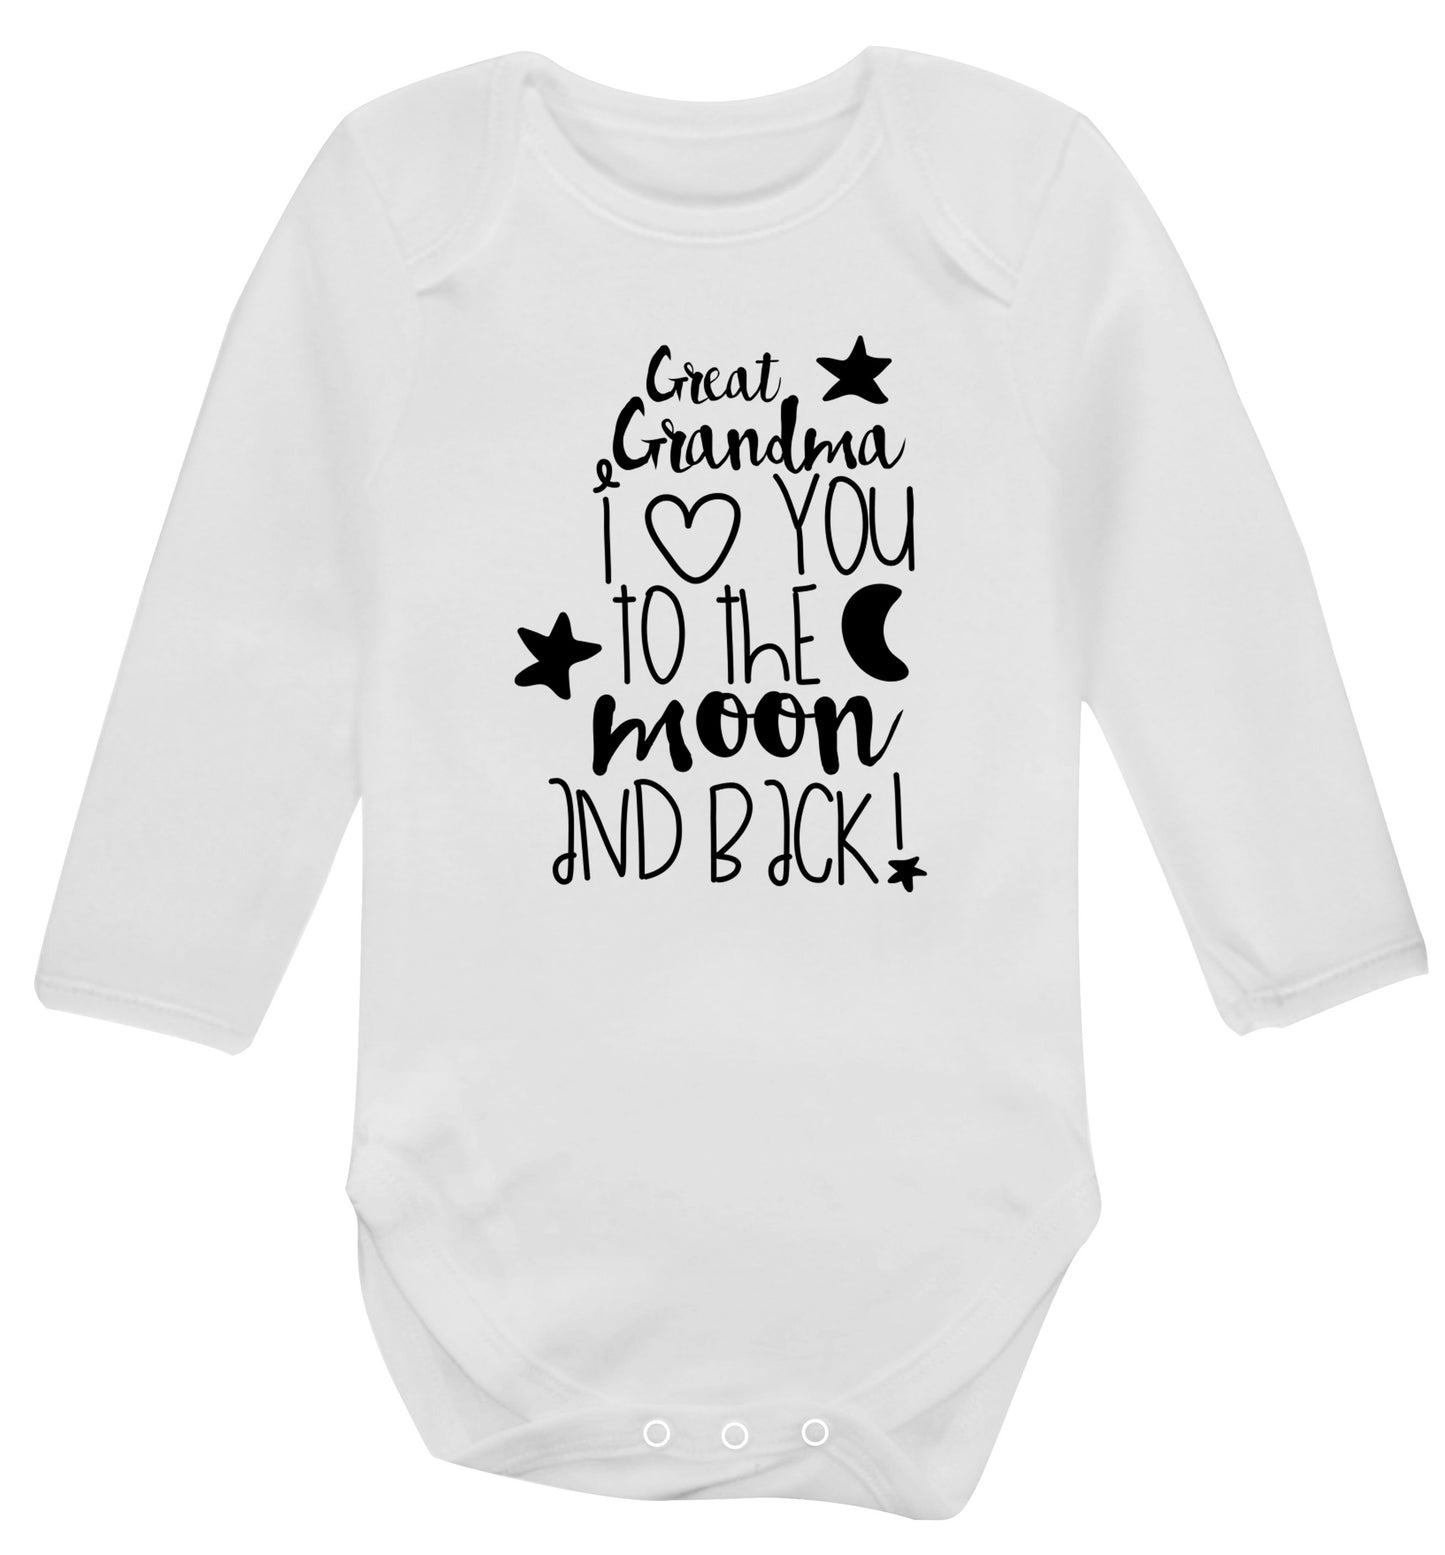 Great Grandma I love you to the moon and back Baby Vest long sleeved white 6-12 months